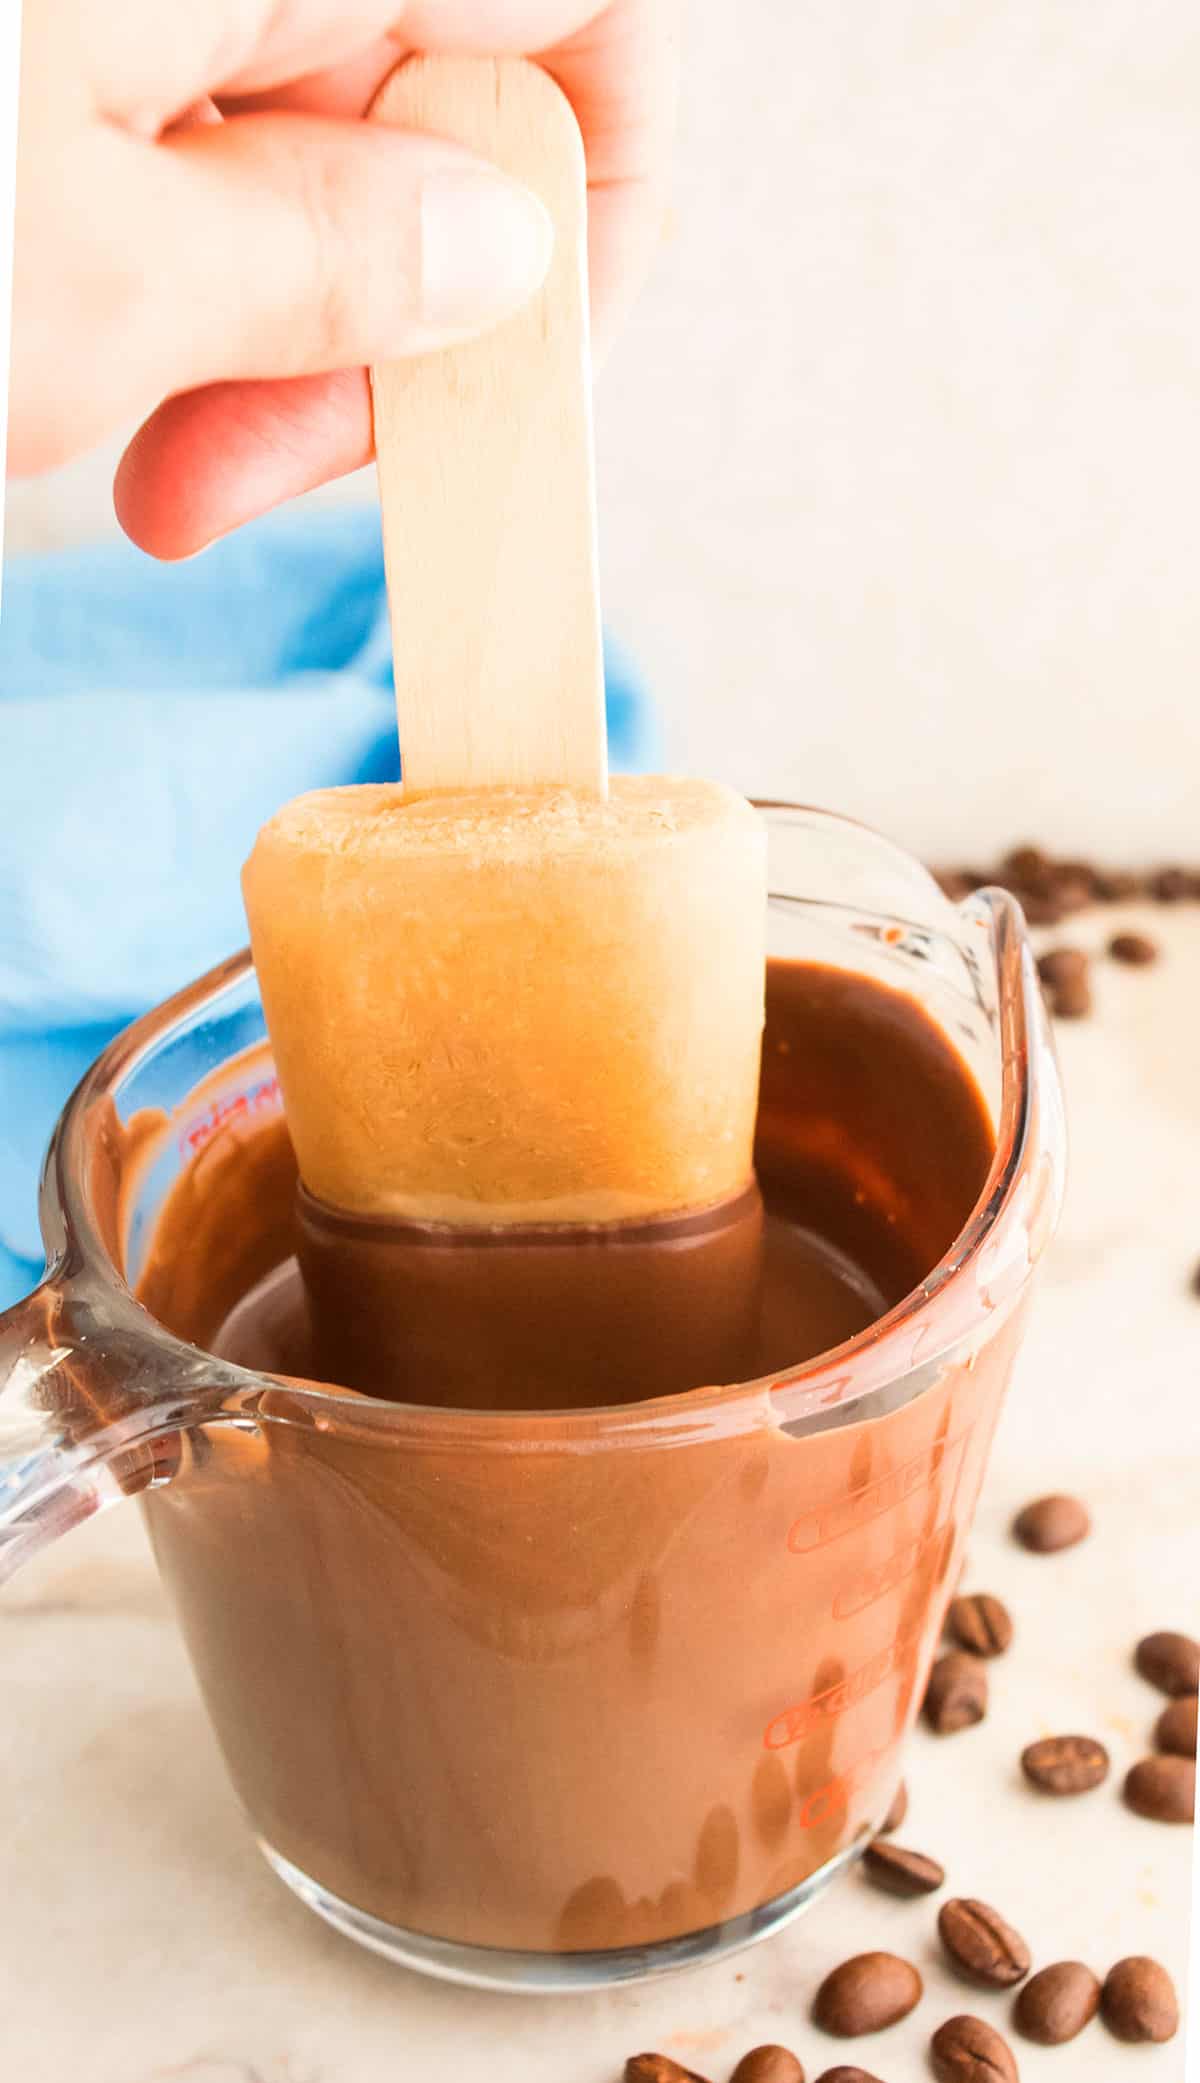 Action Shot of Frozen Popsicle Being Dipped in Cup of Melted Chocolate. 